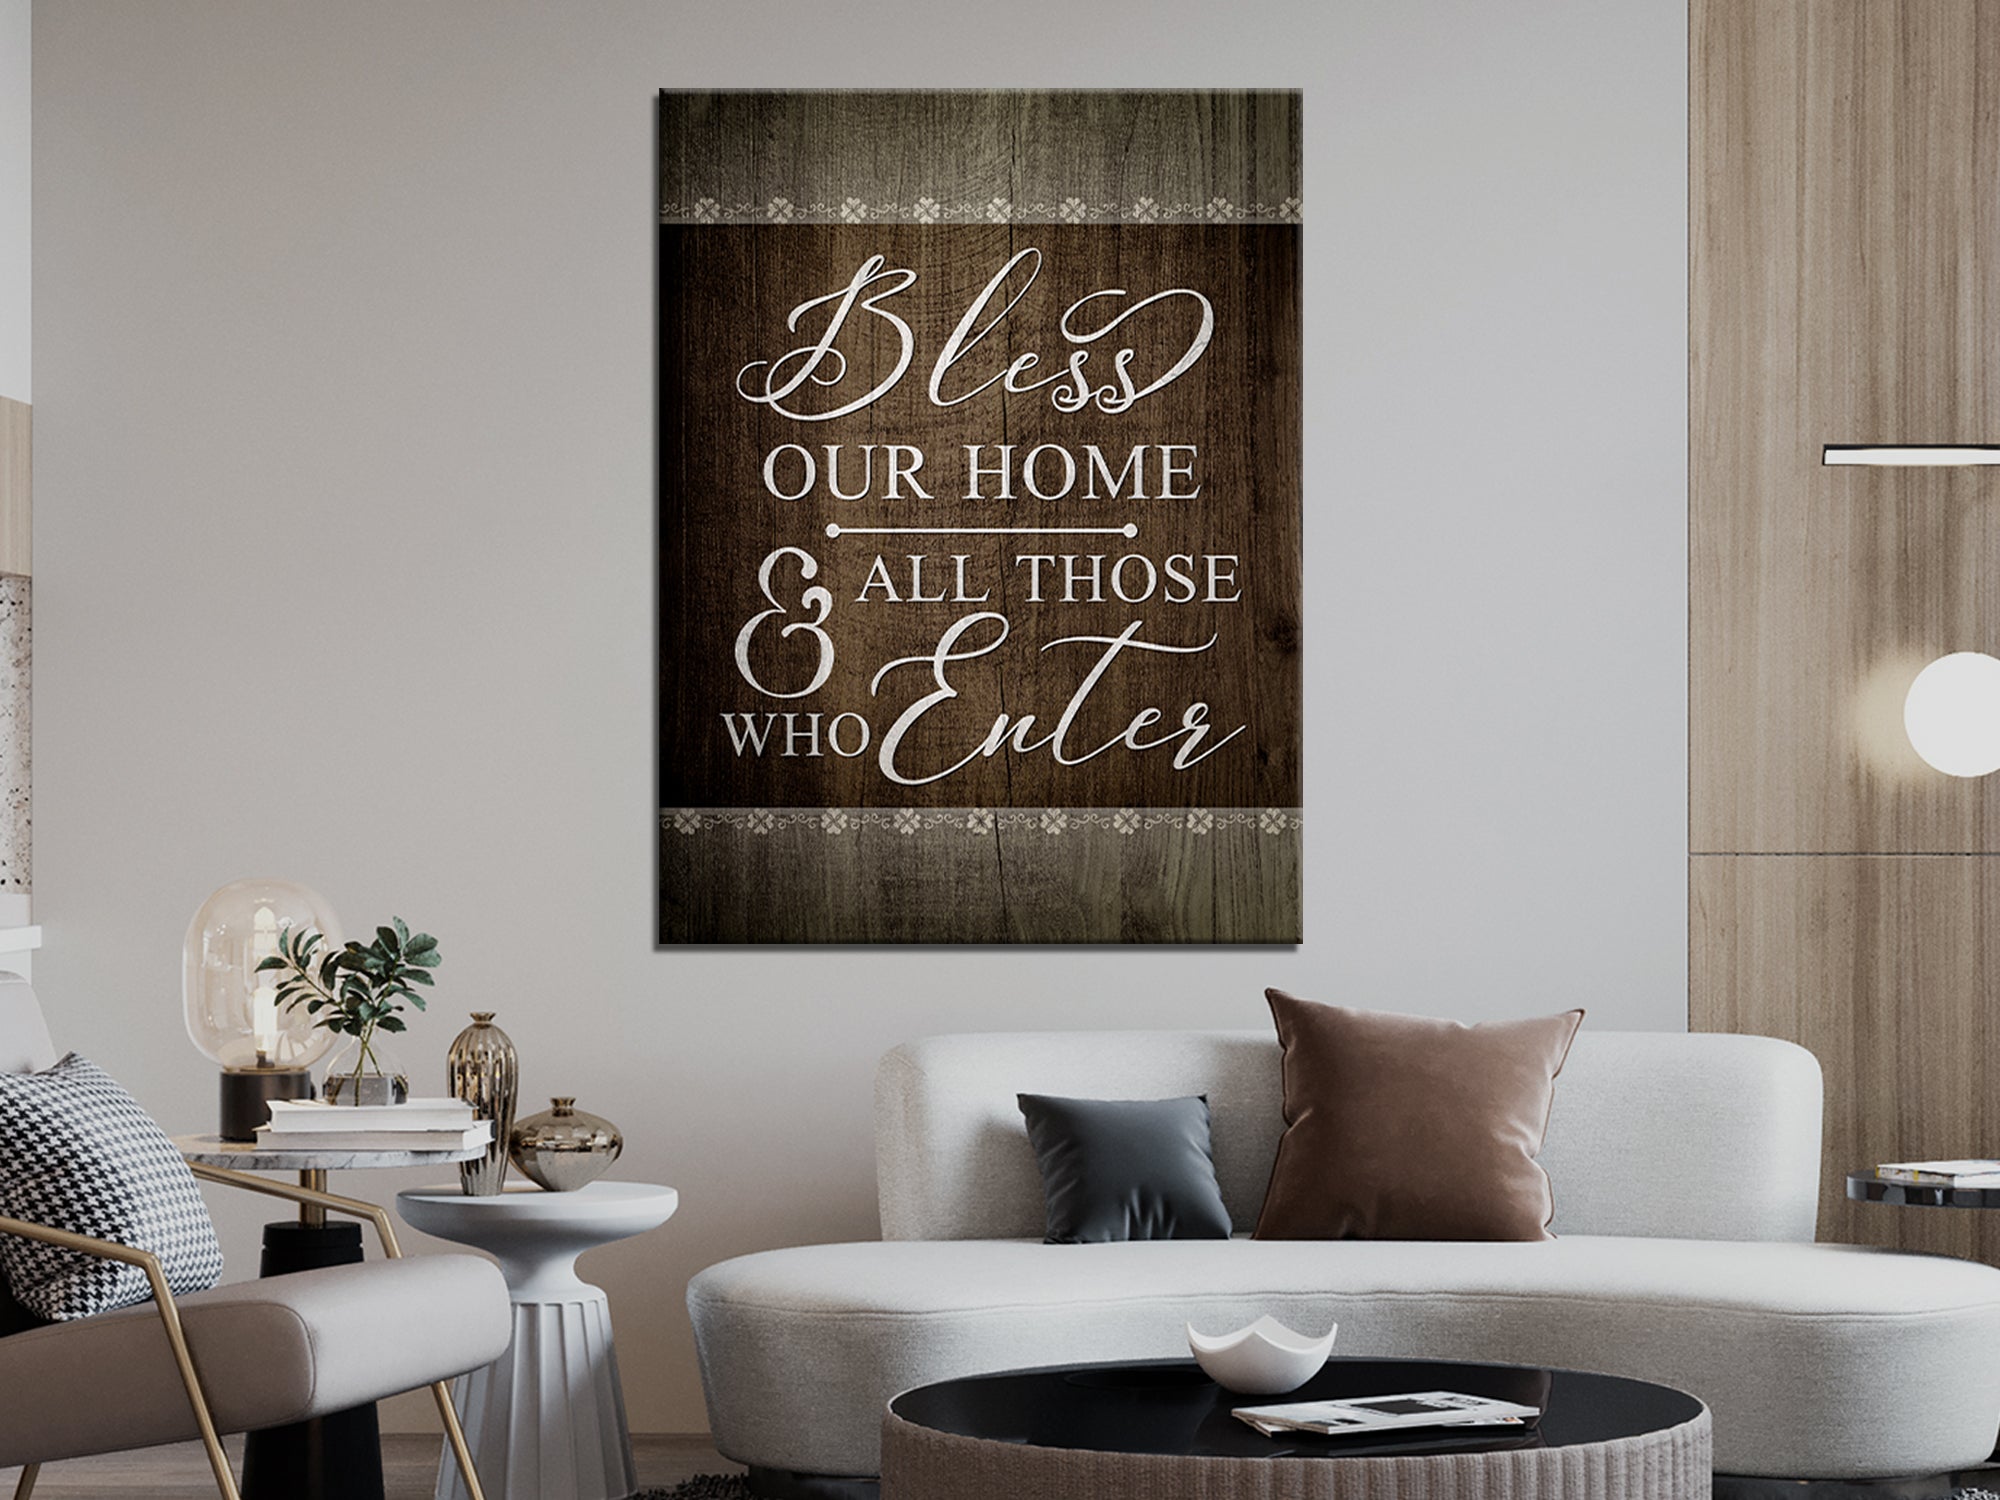 All Those Who Enter - Christian - Canvas Wall Art